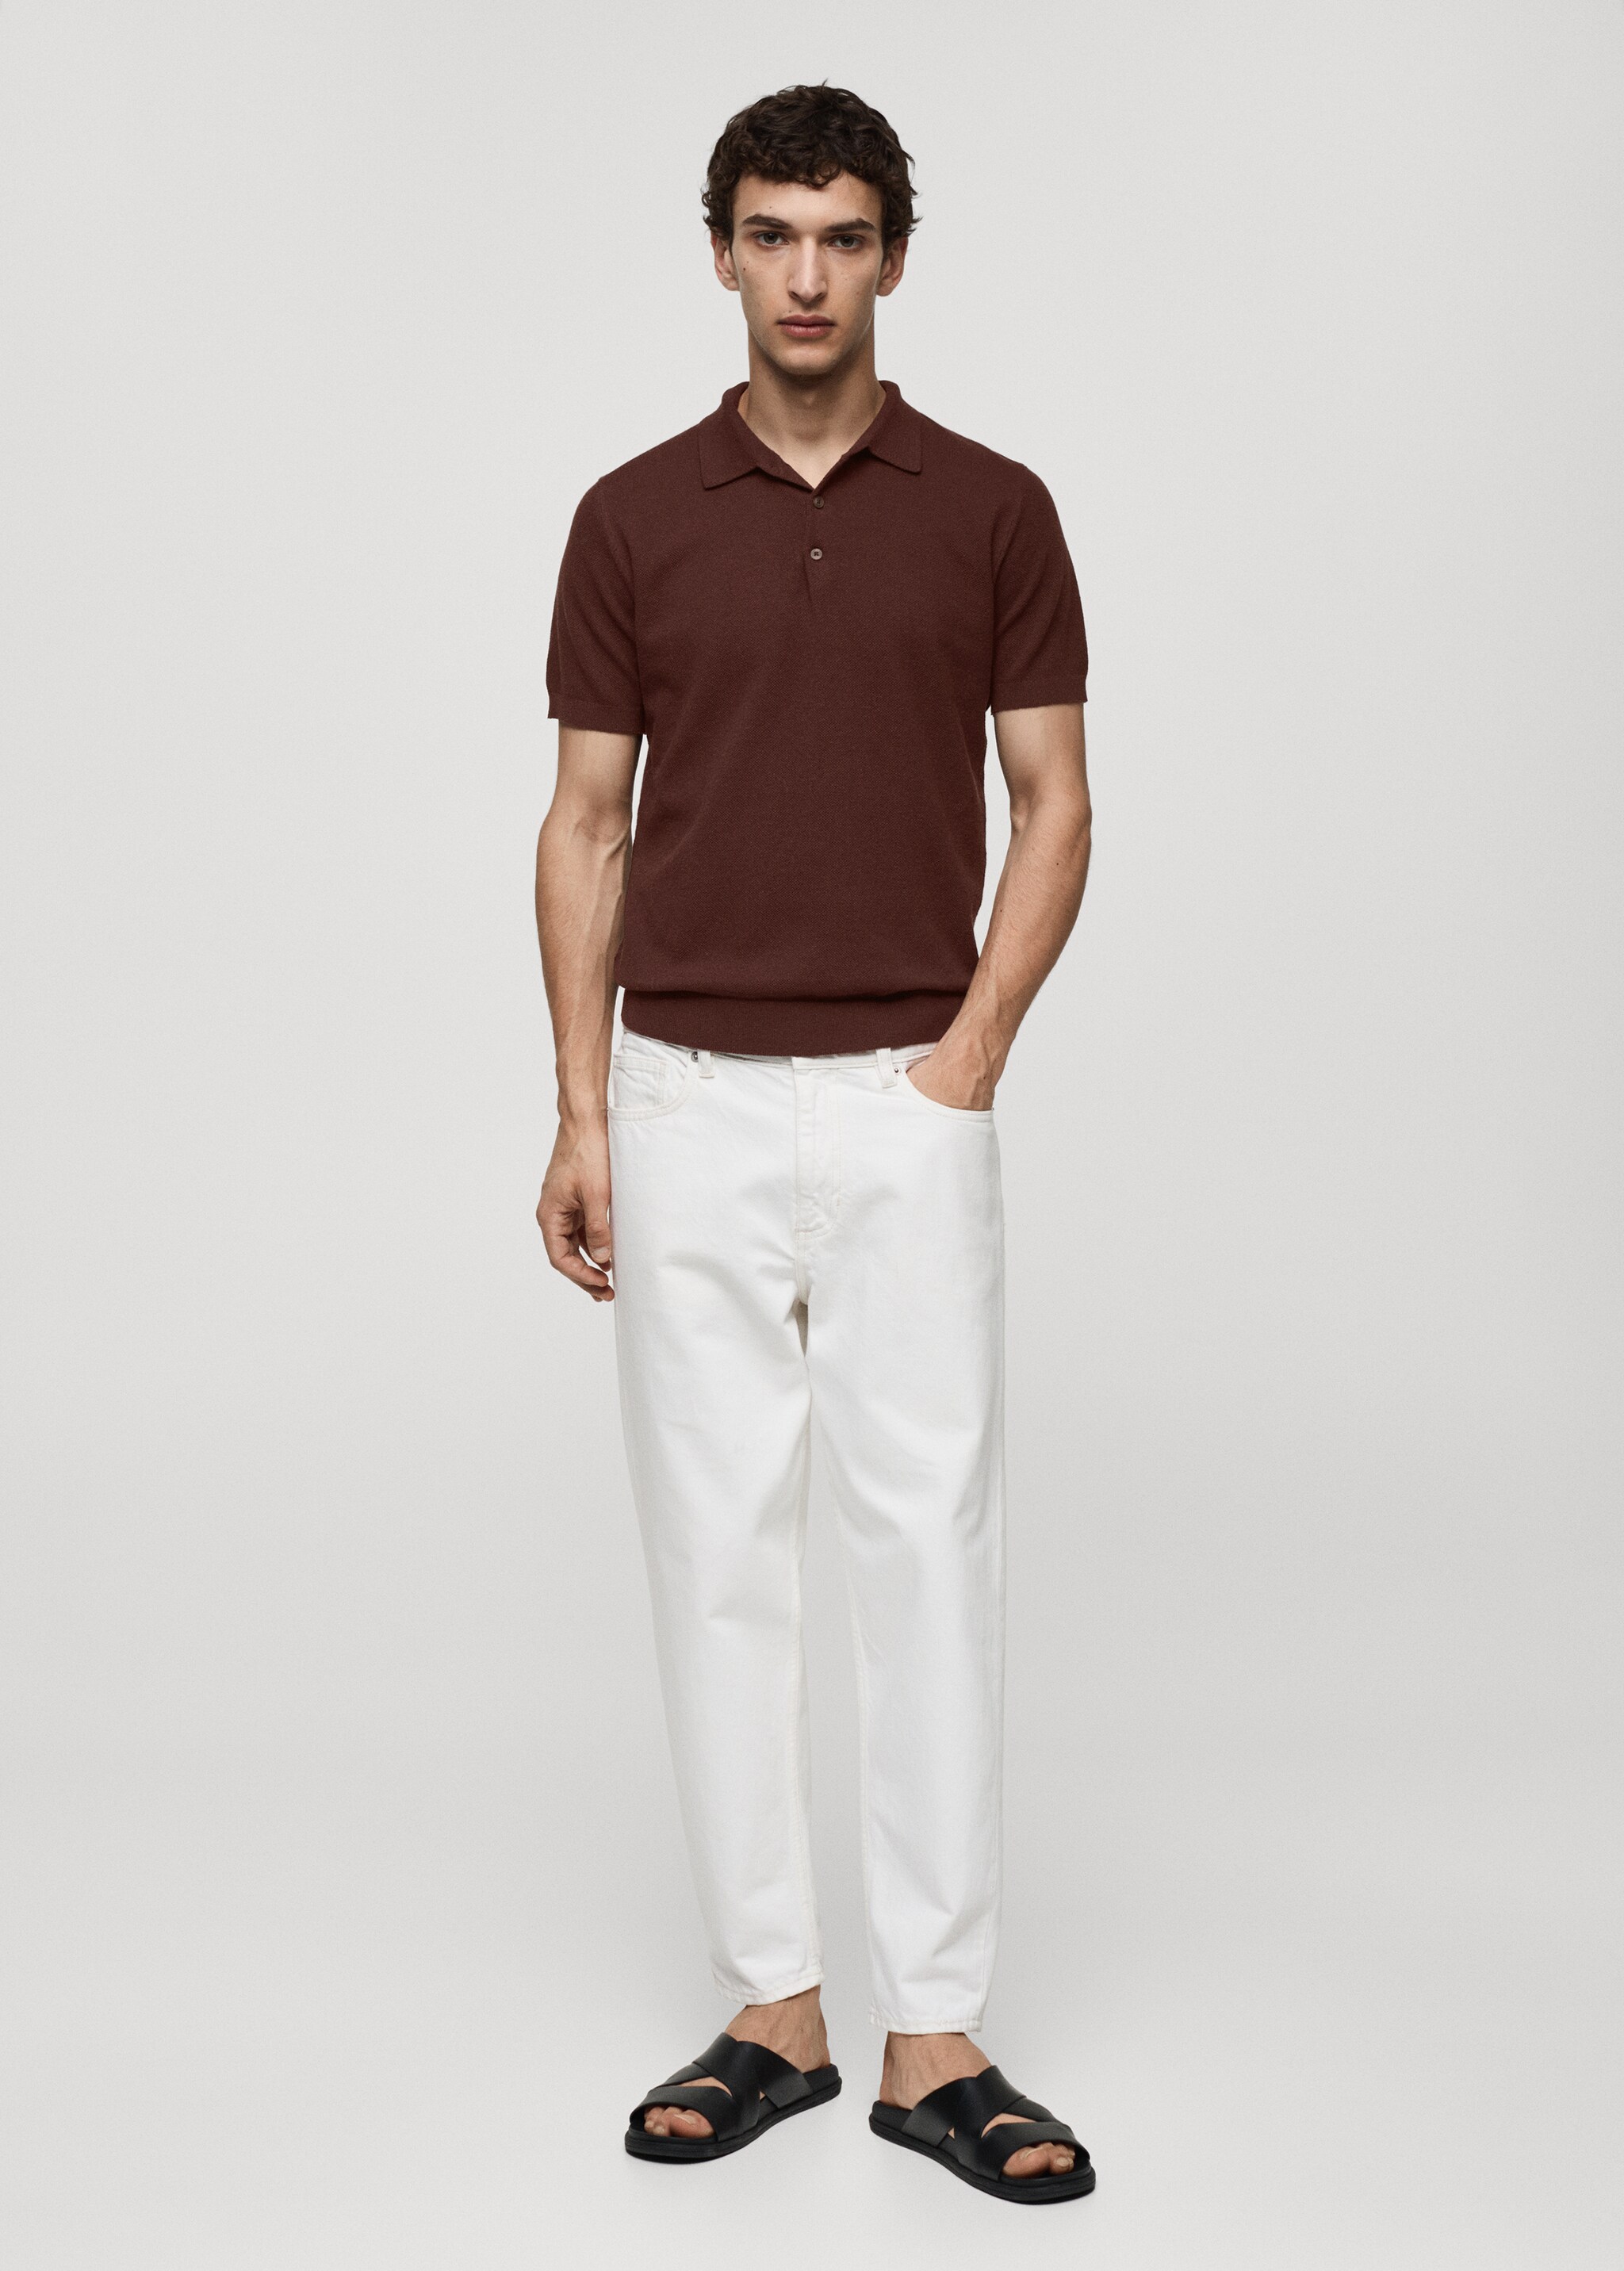 Short-sleeve knitted polo shirt - General plane